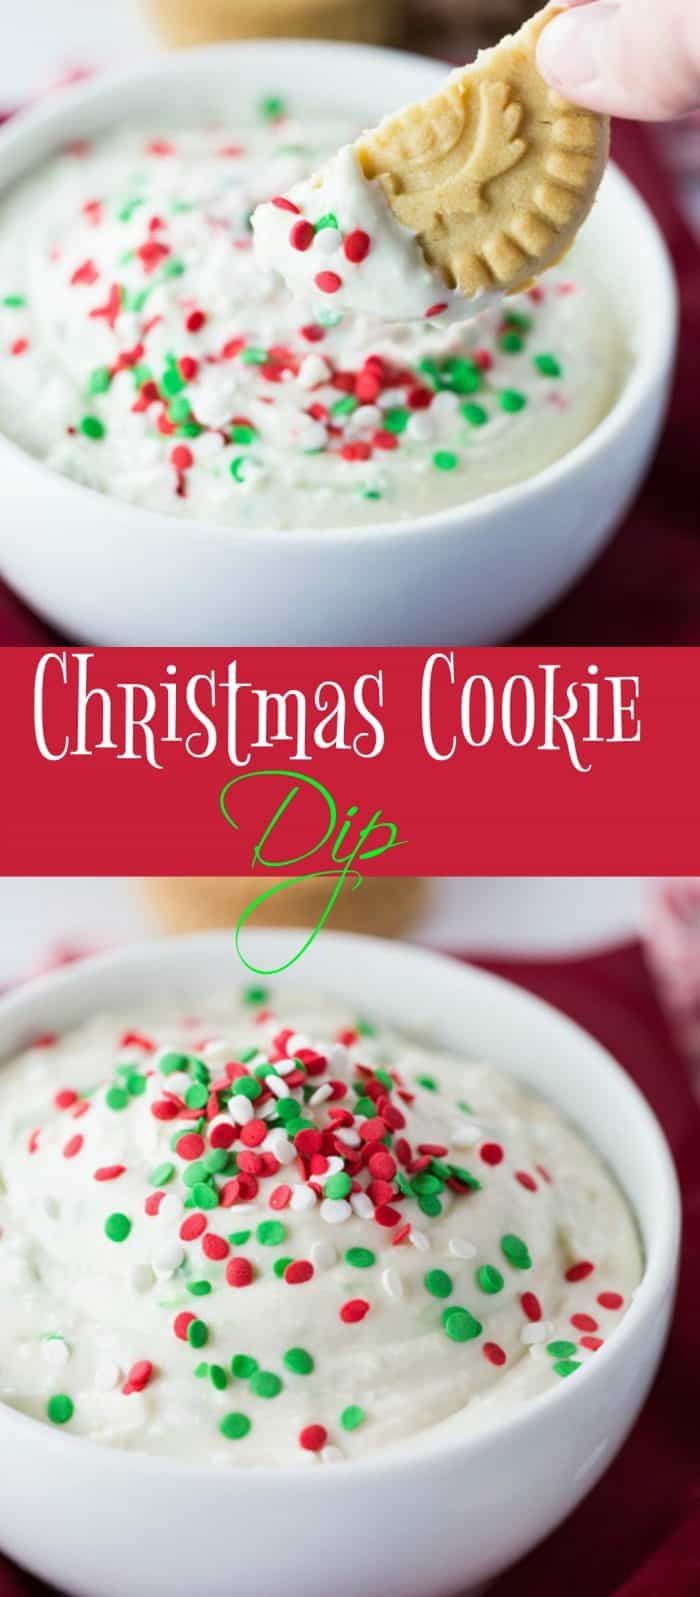 This white and Fluffy Christmas Cookie Dip is topped with sprinkles and served with your favorite cookies, fruit, or pretzels. A sweet and simple snack that's perfect for the holidays! | The Cozy Cook | #christmas #dip #dessert #holidays #sweet #sprinkles #cookiedip